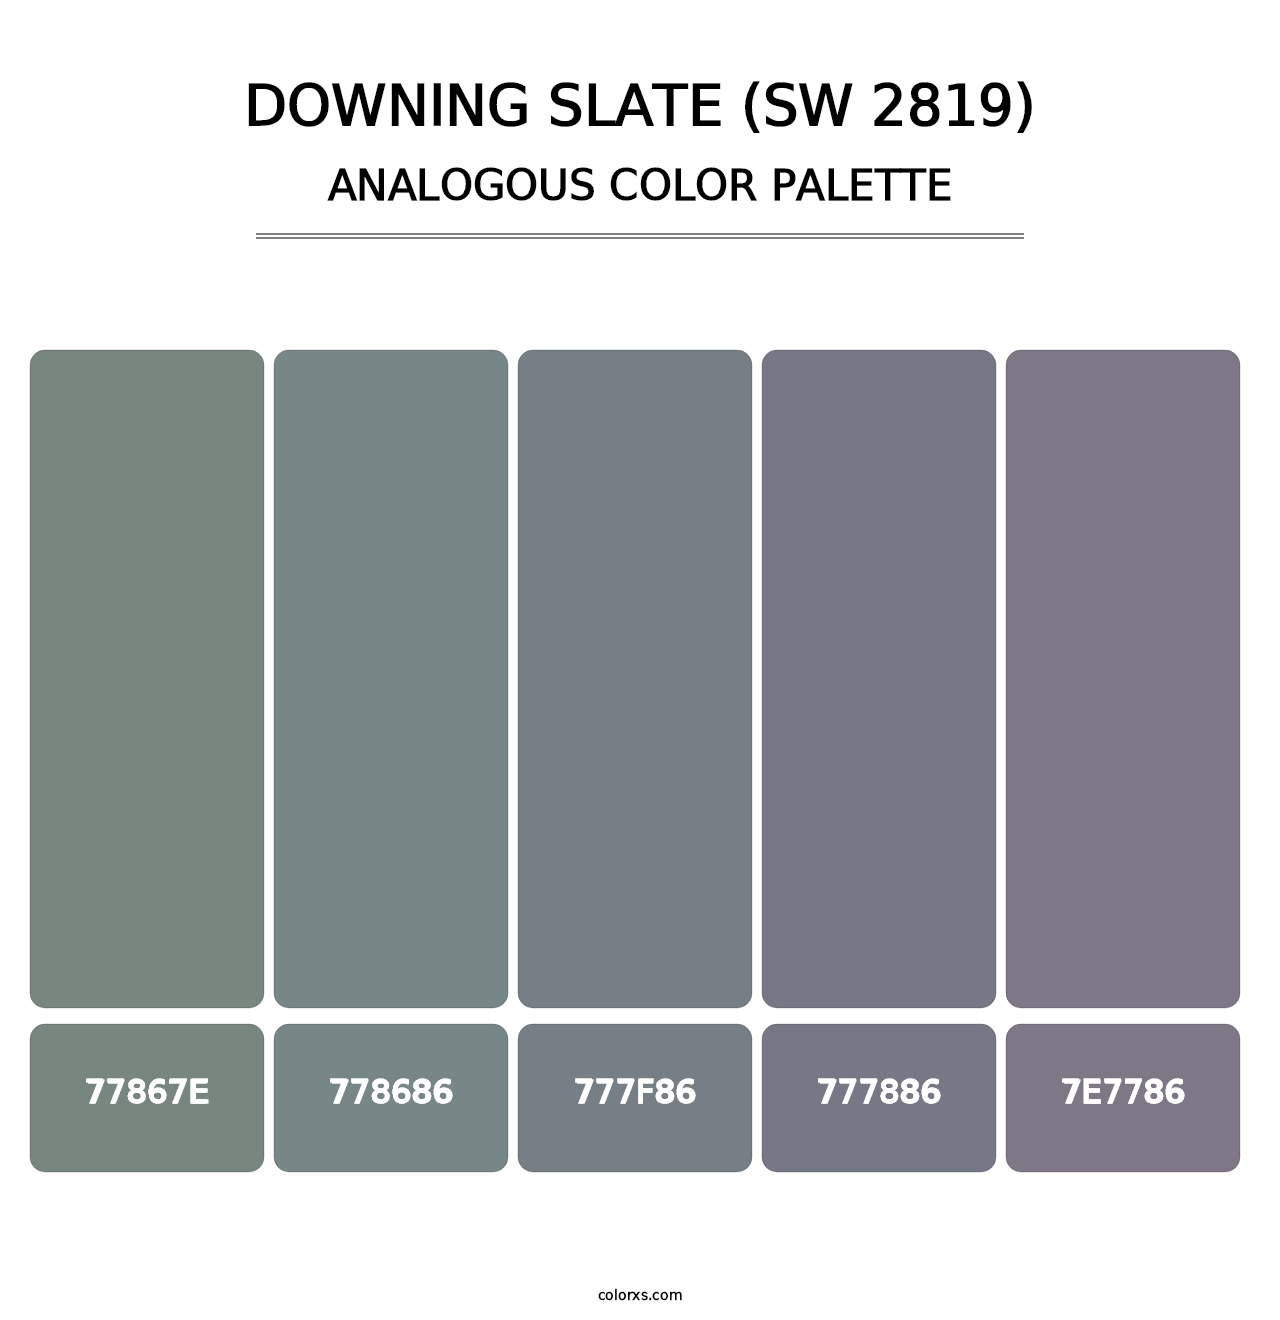 Downing Slate (SW 2819) - Analogous Color Palette